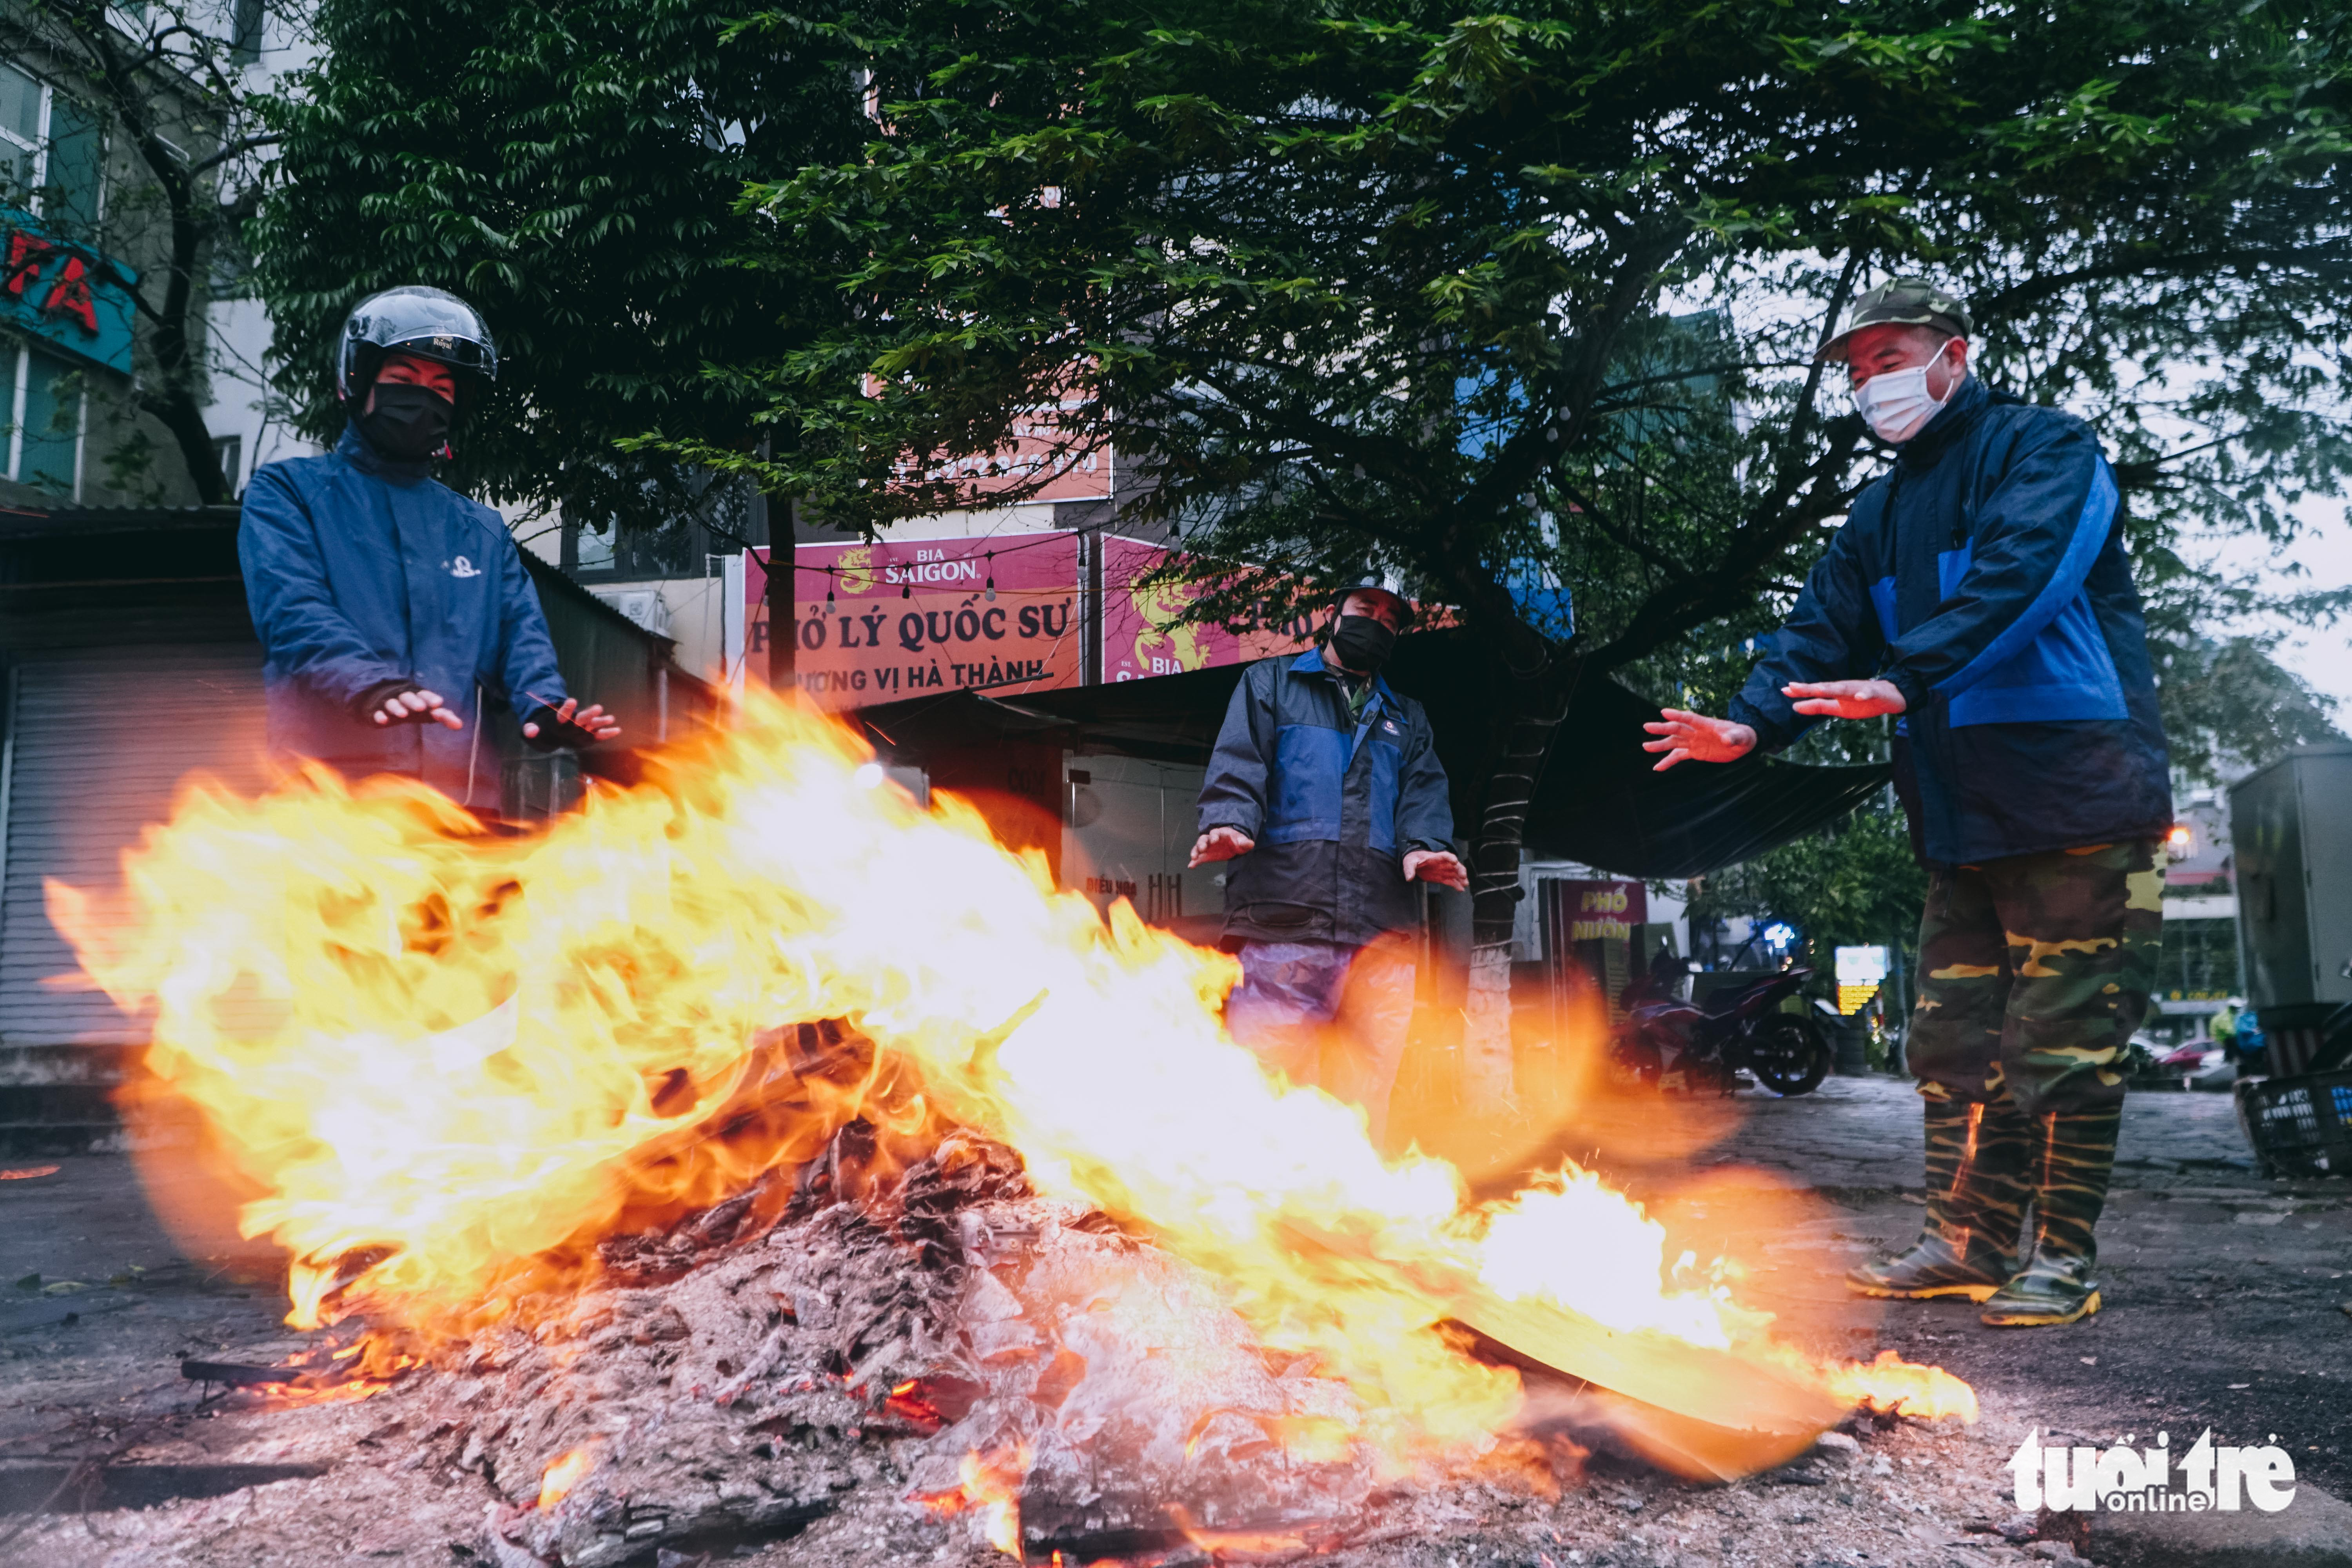 Residents stand by a bonfire on a sidewalk in Hanoi, February 19, 2022. Photo: Pham Tuan / Tuoi Tre